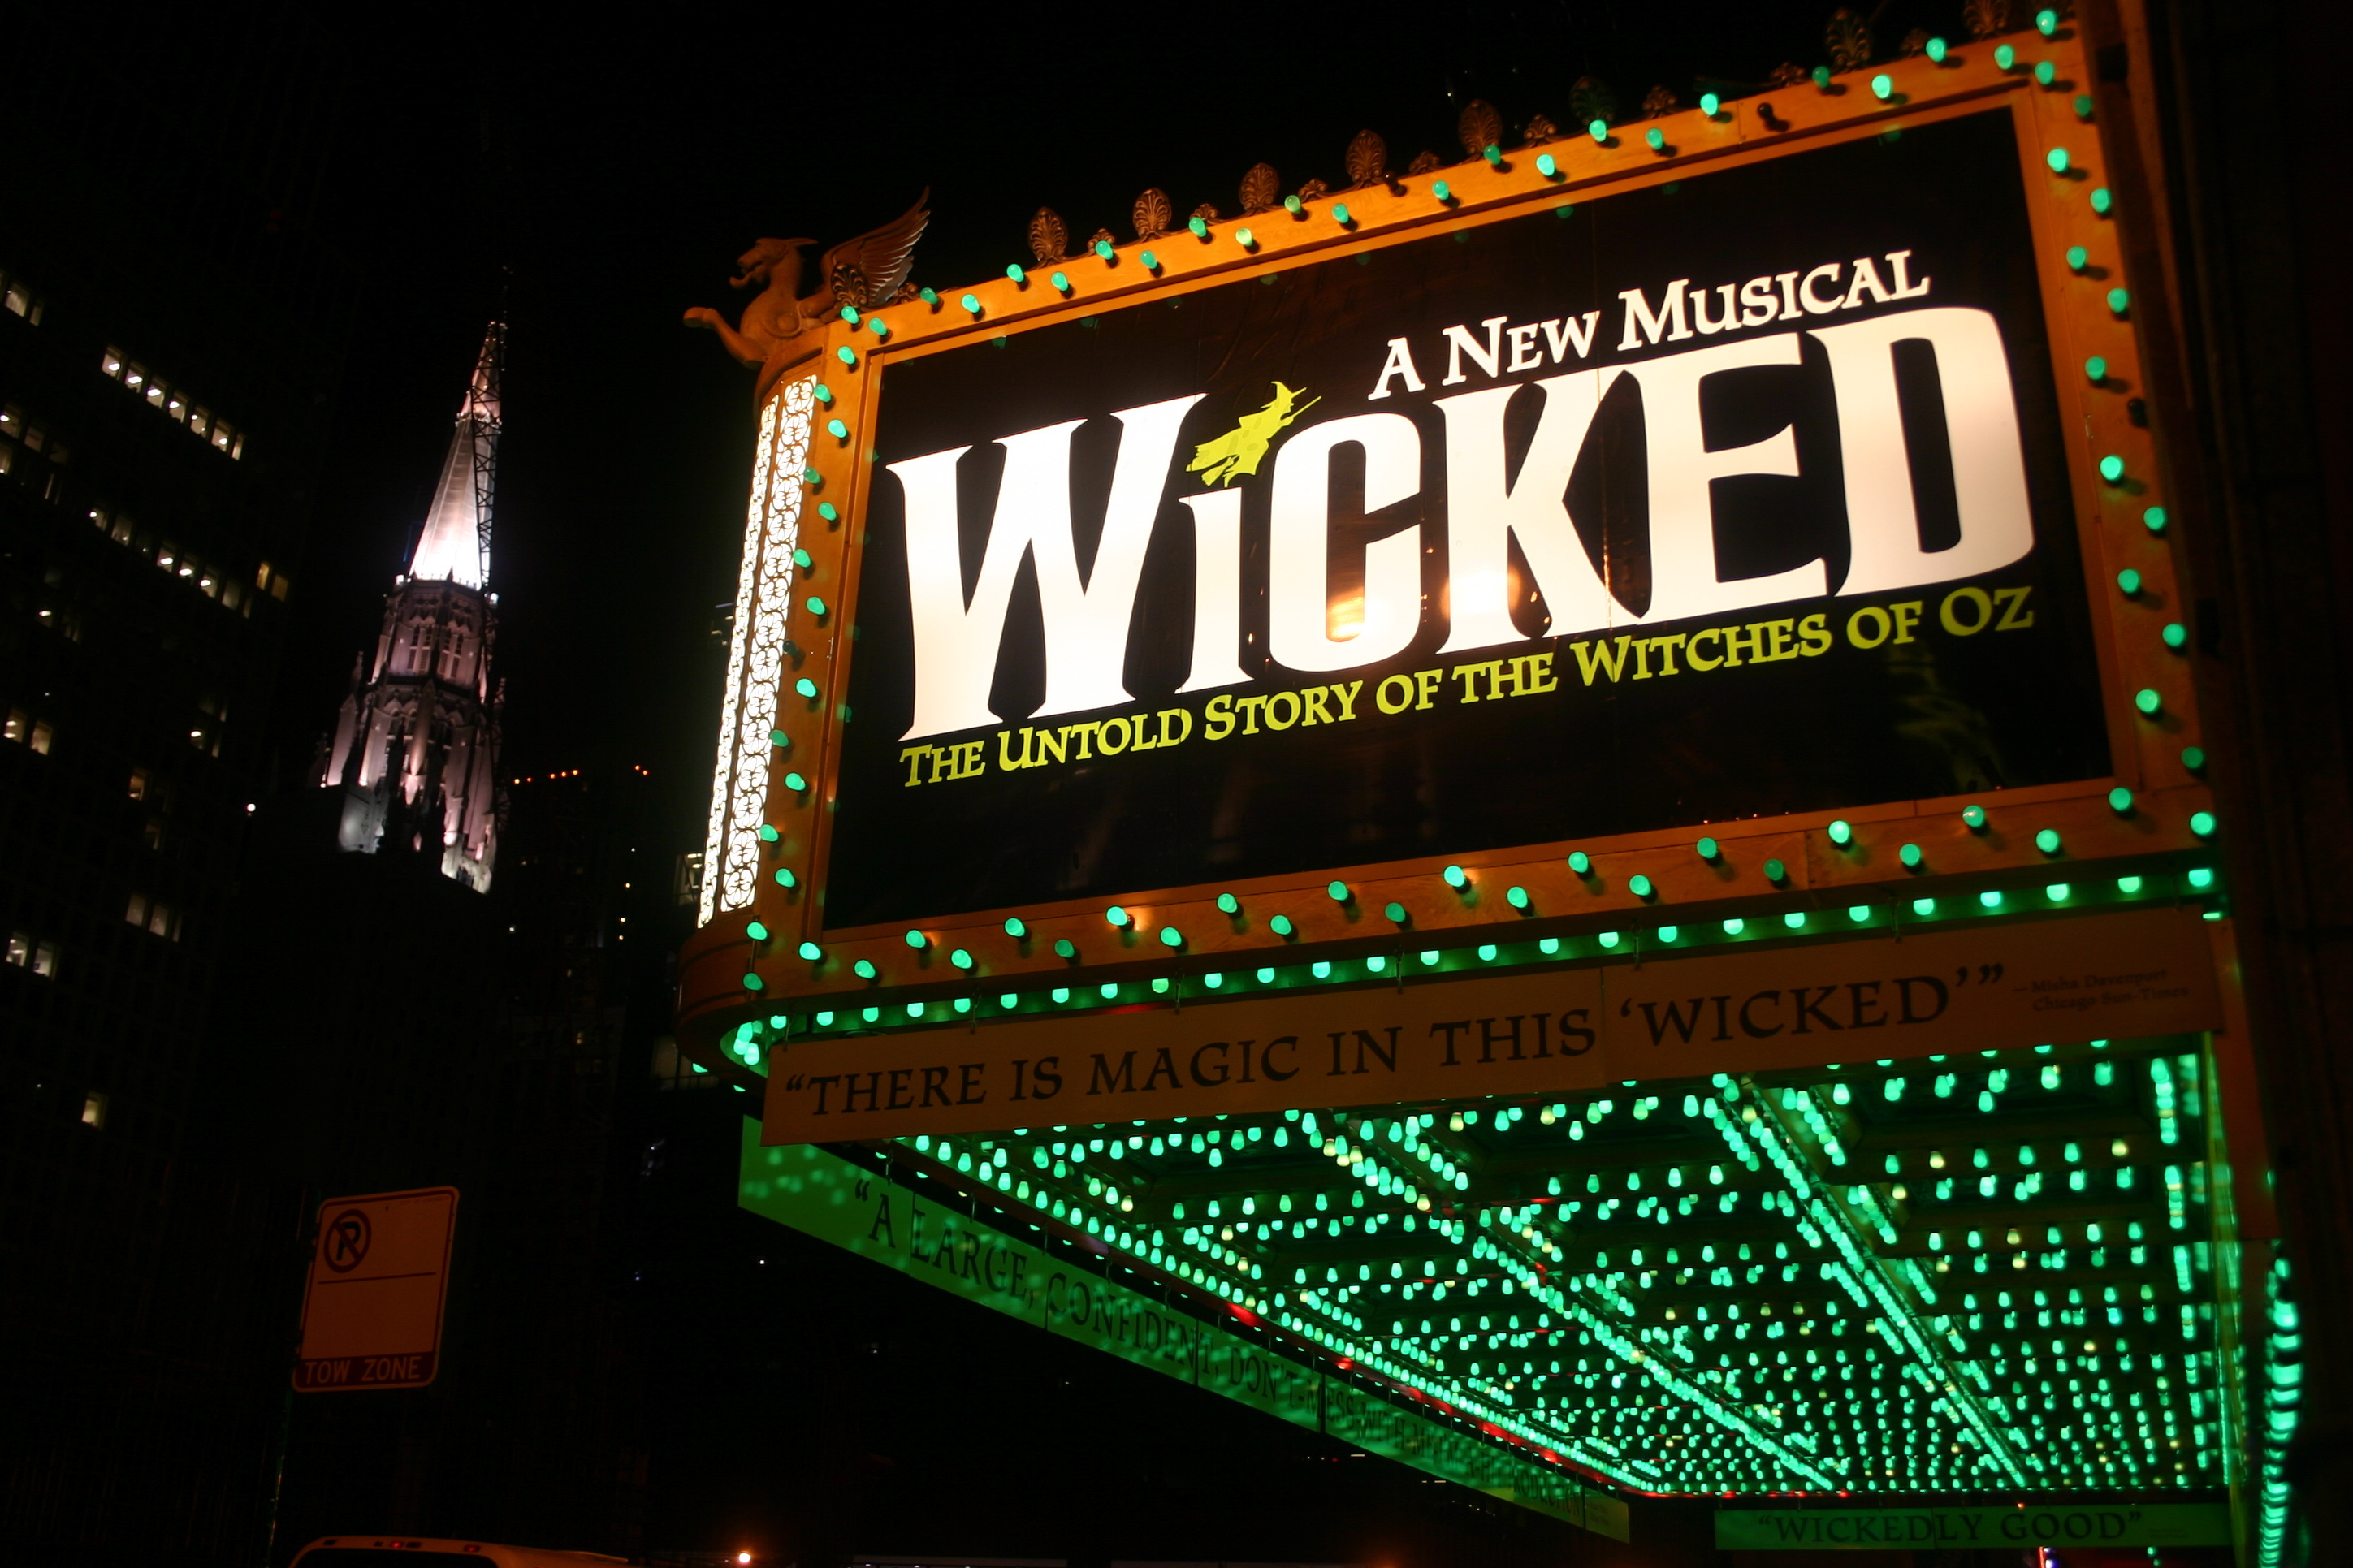 File:Wicked, oriental theater in chicago.jpg - Wikimedia Commons